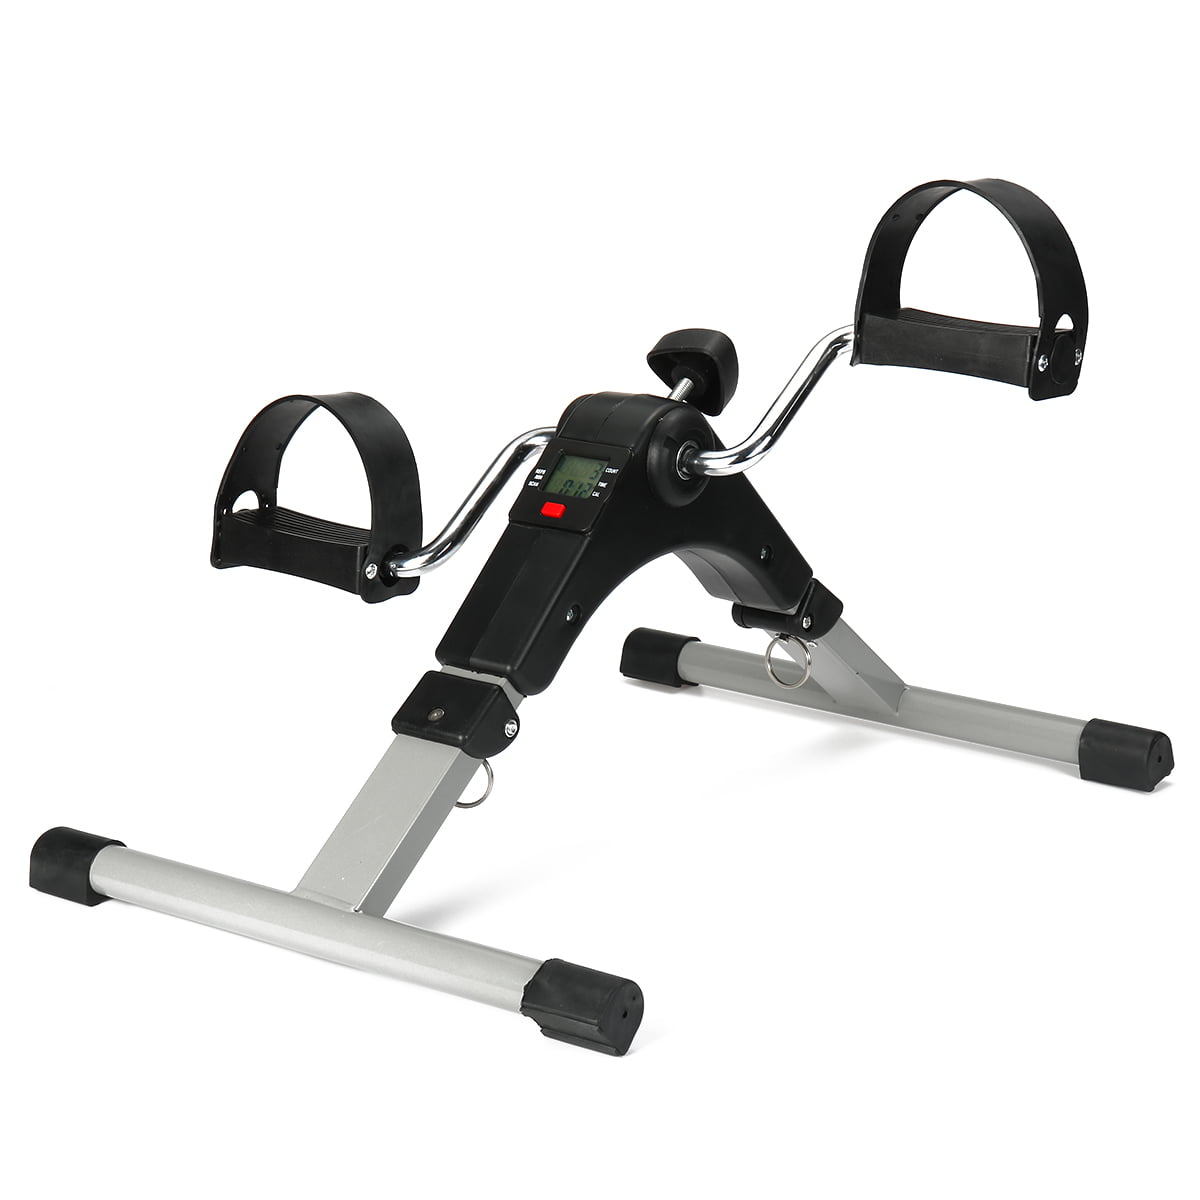 Mini Cycle Fitness Pedal Exerciser Upper and Lower Body Fitness Workout Machine 